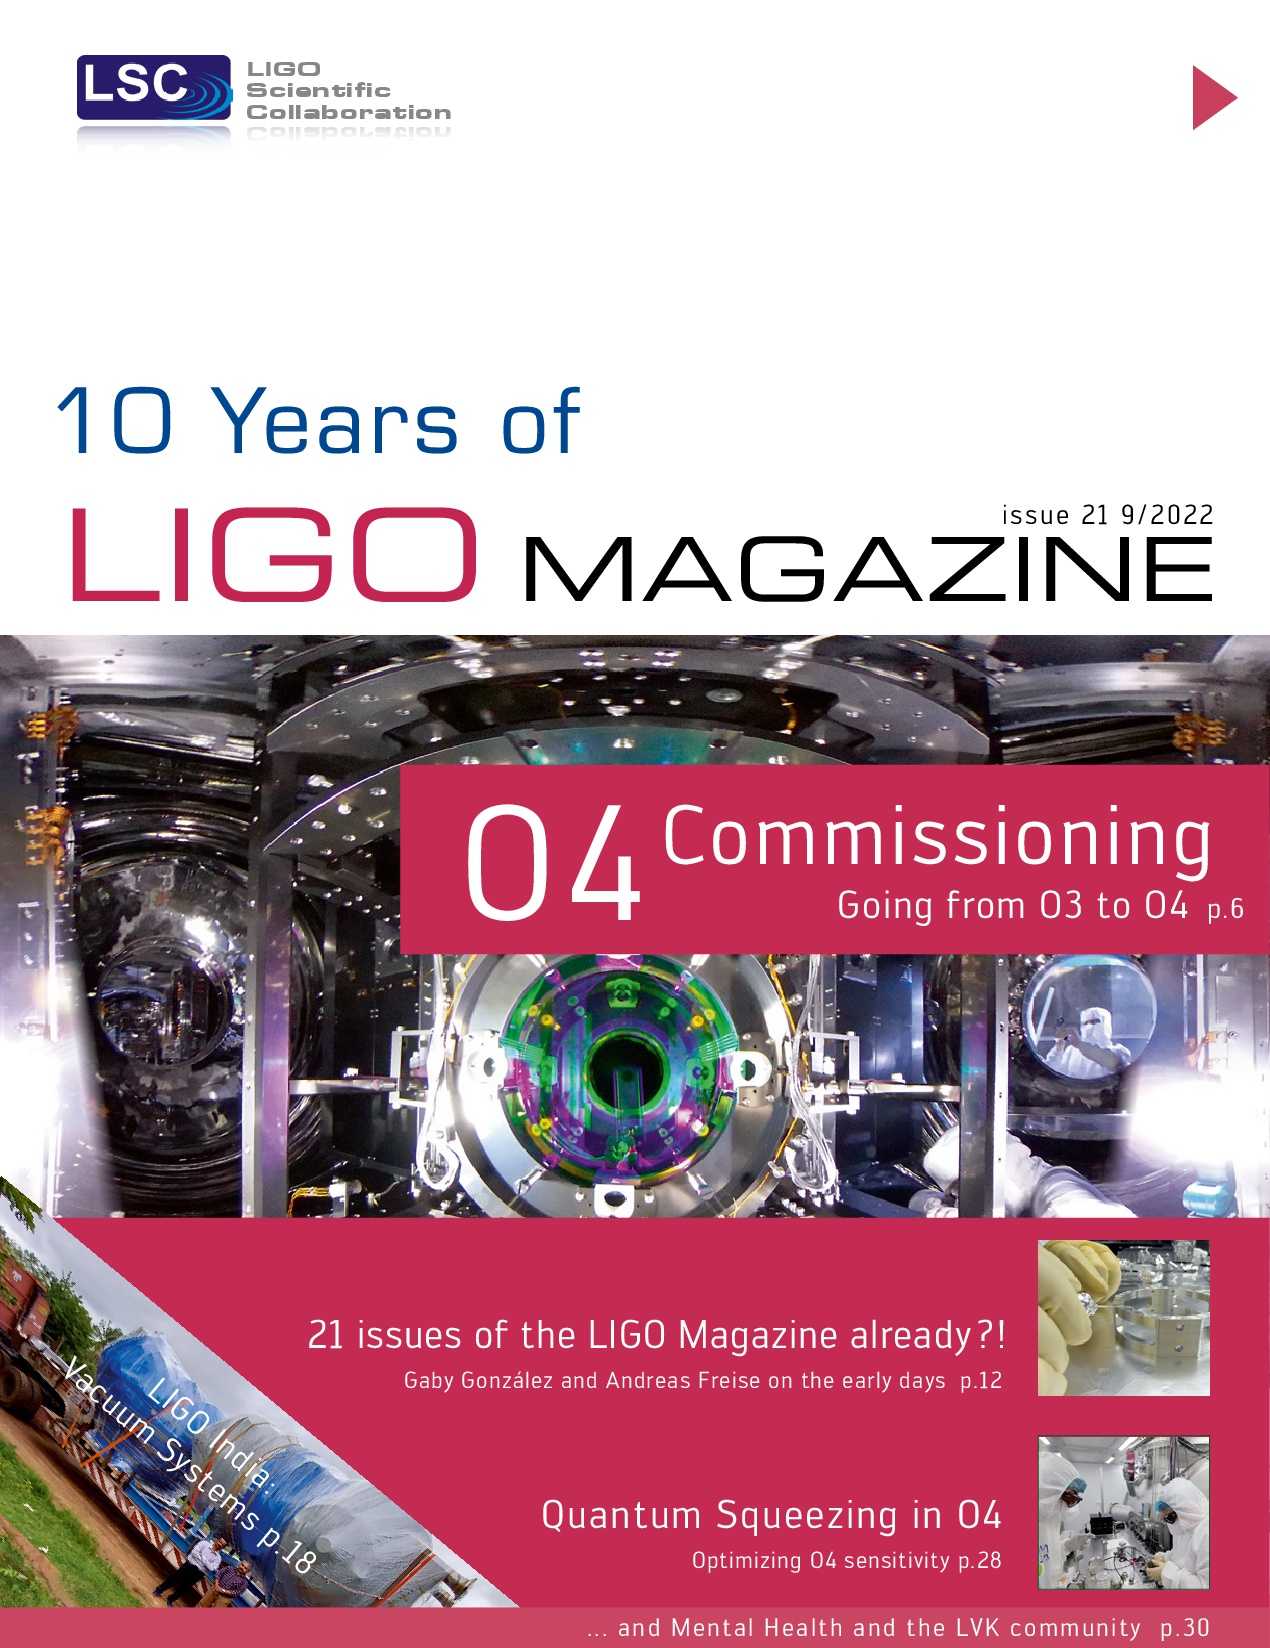 News-Image 30 of: New LIGO Magazine Issue 21 is out